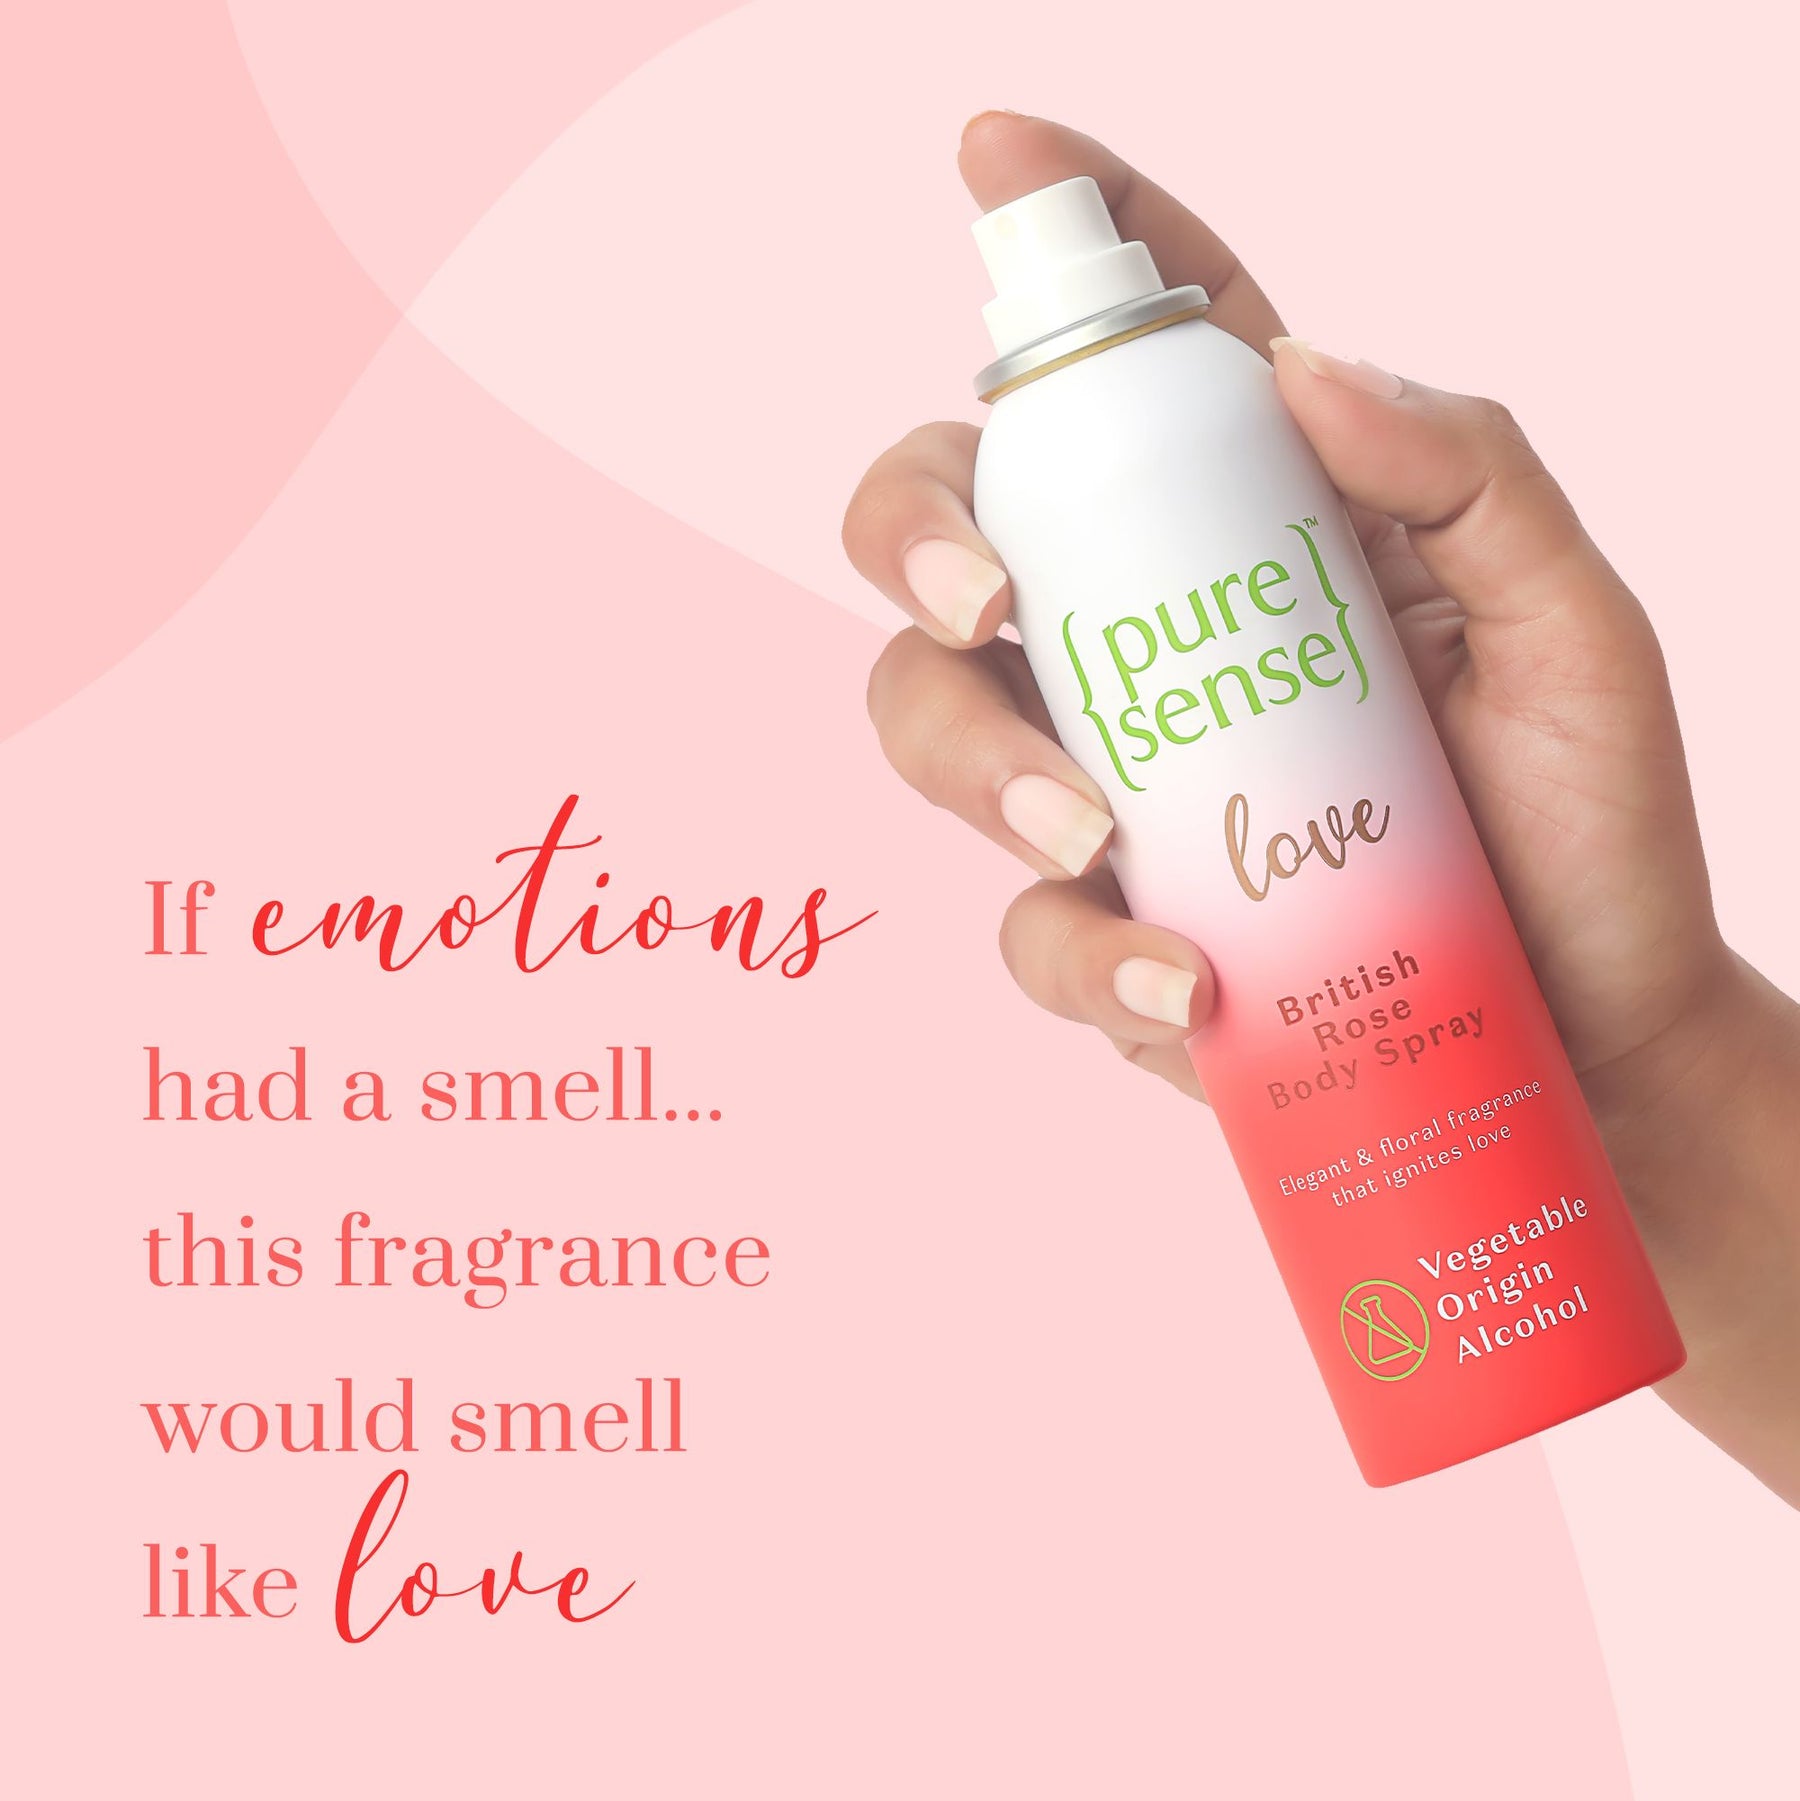 [CRED] Love British Rose Body Spray | From the makers of Parachute Advansed | 150ml - PureSense